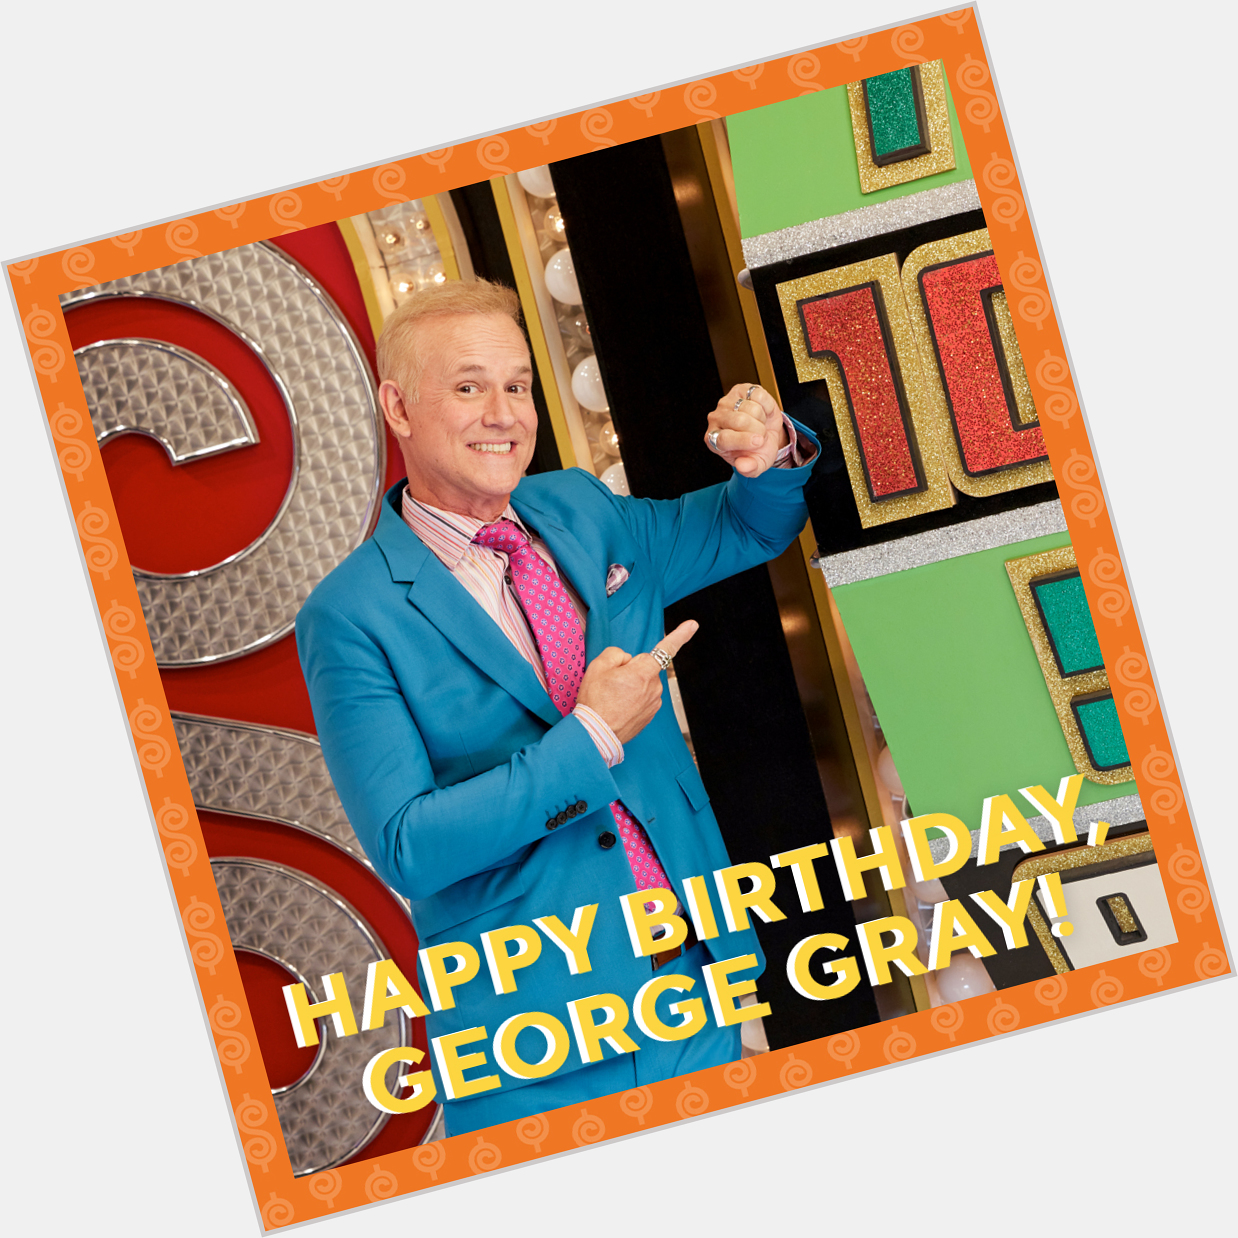 Wishing a happy birthday to our incredible announcer, George Gray! 